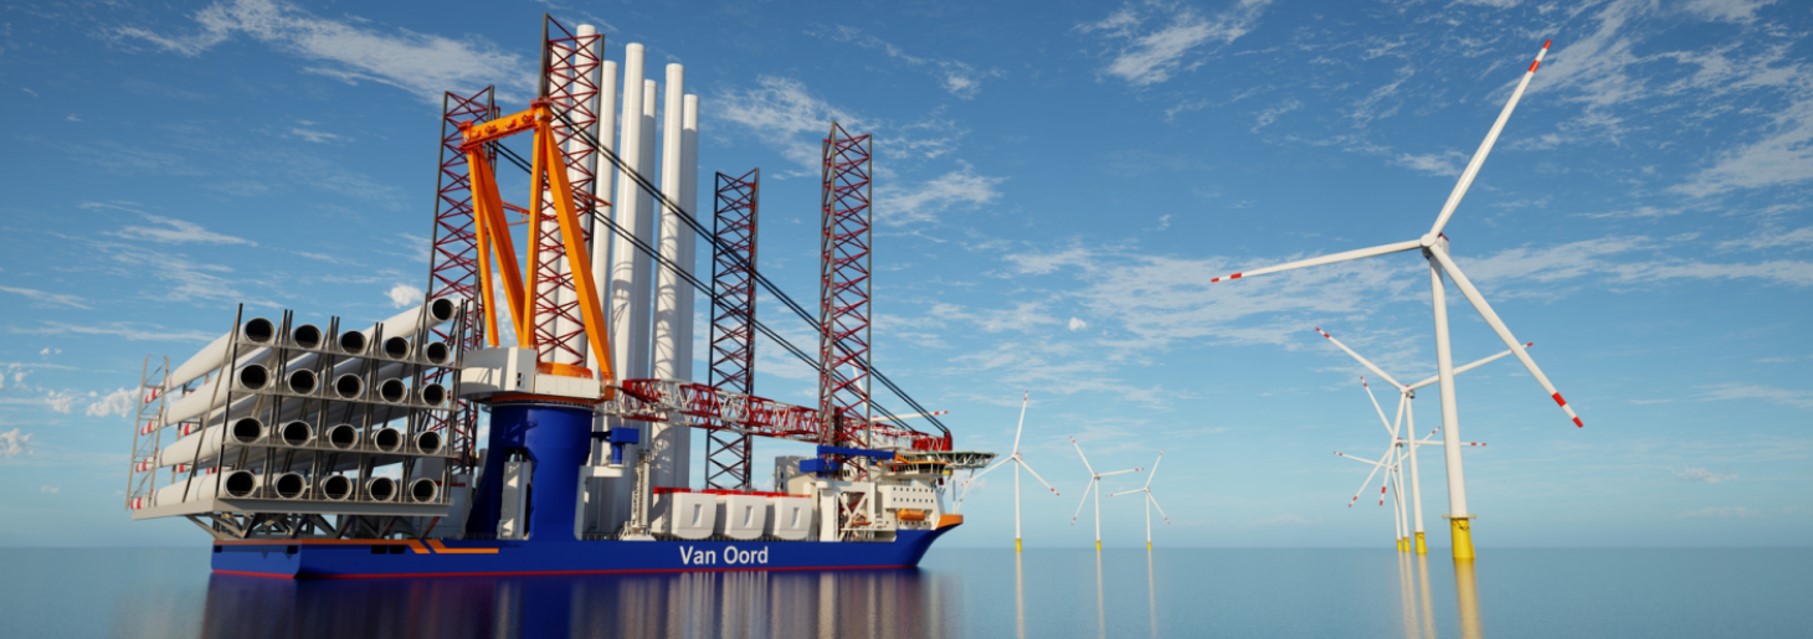 Ecowende joins forces with Van Oord to build most ecological wind farm yet